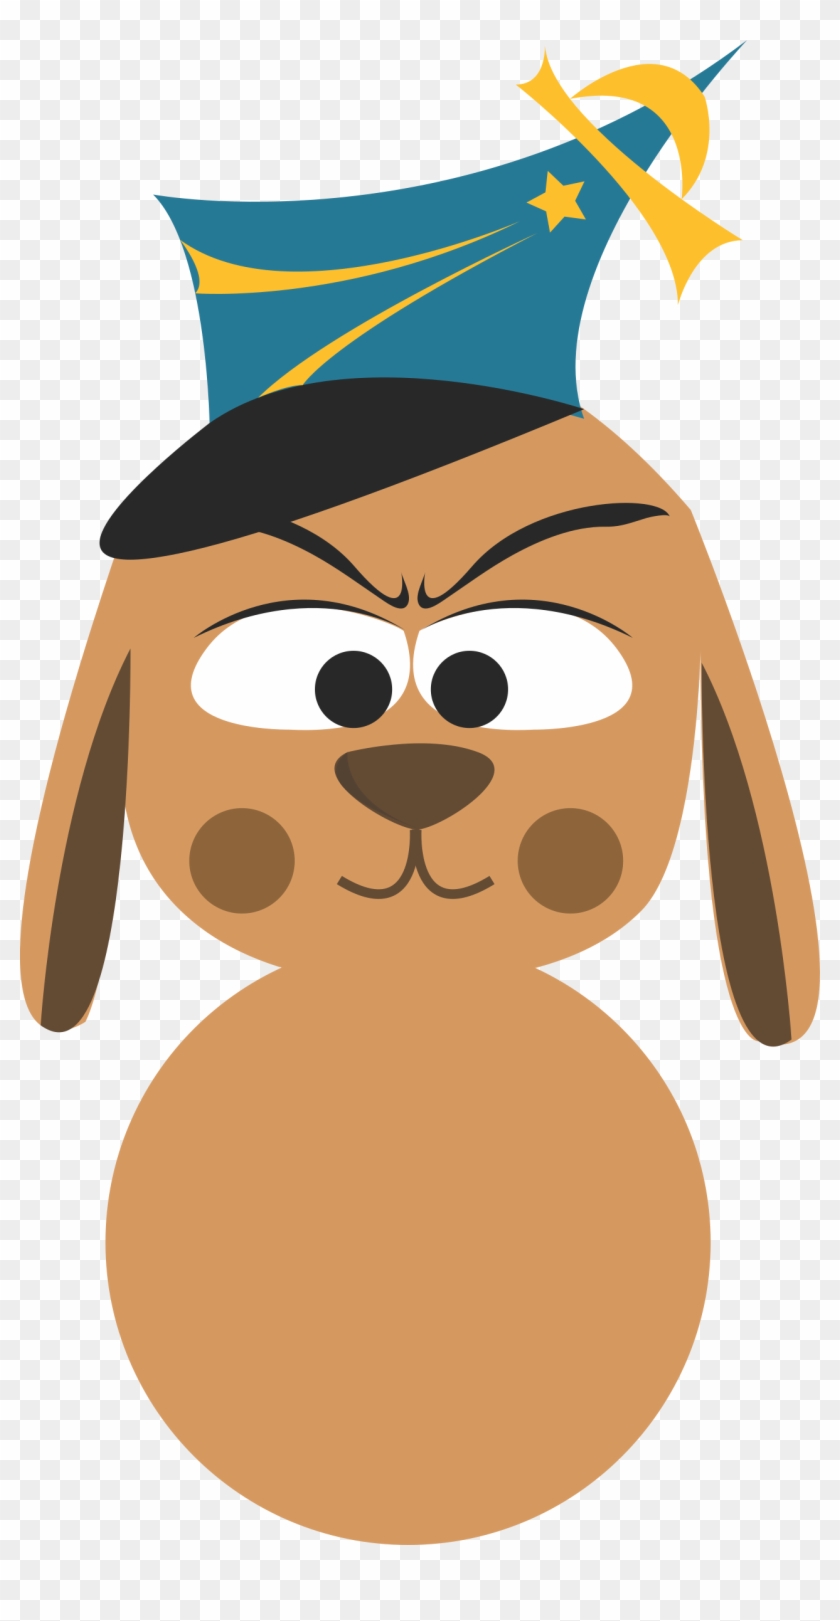 Police Clipart Avatar - National Animal Control Officer Appreciation Week 2018 #447045